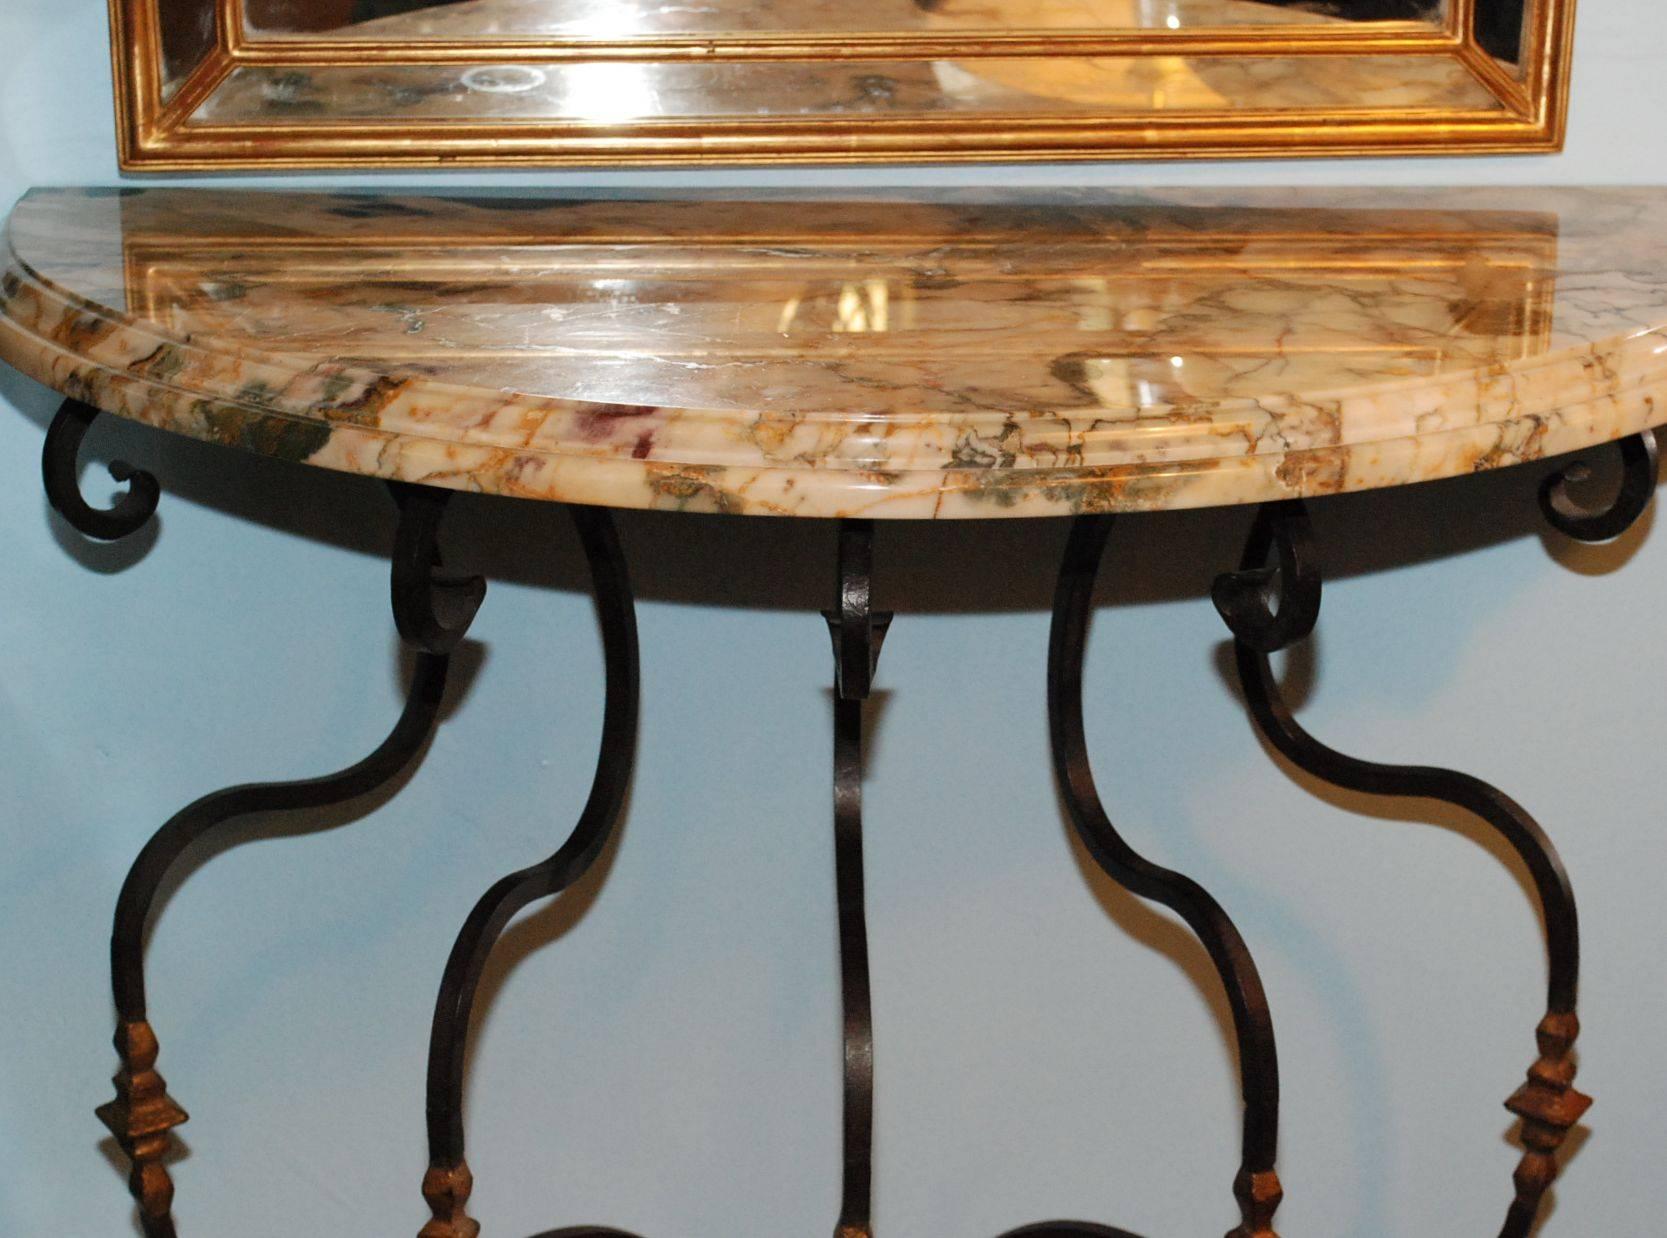 A pair of marble iron console tables. Each surmounted by an especially well figured and crossbanded breccia marble demilune top; the openwork plannished iron under frames detailed with tendril scroll and embellished with gilded knops.